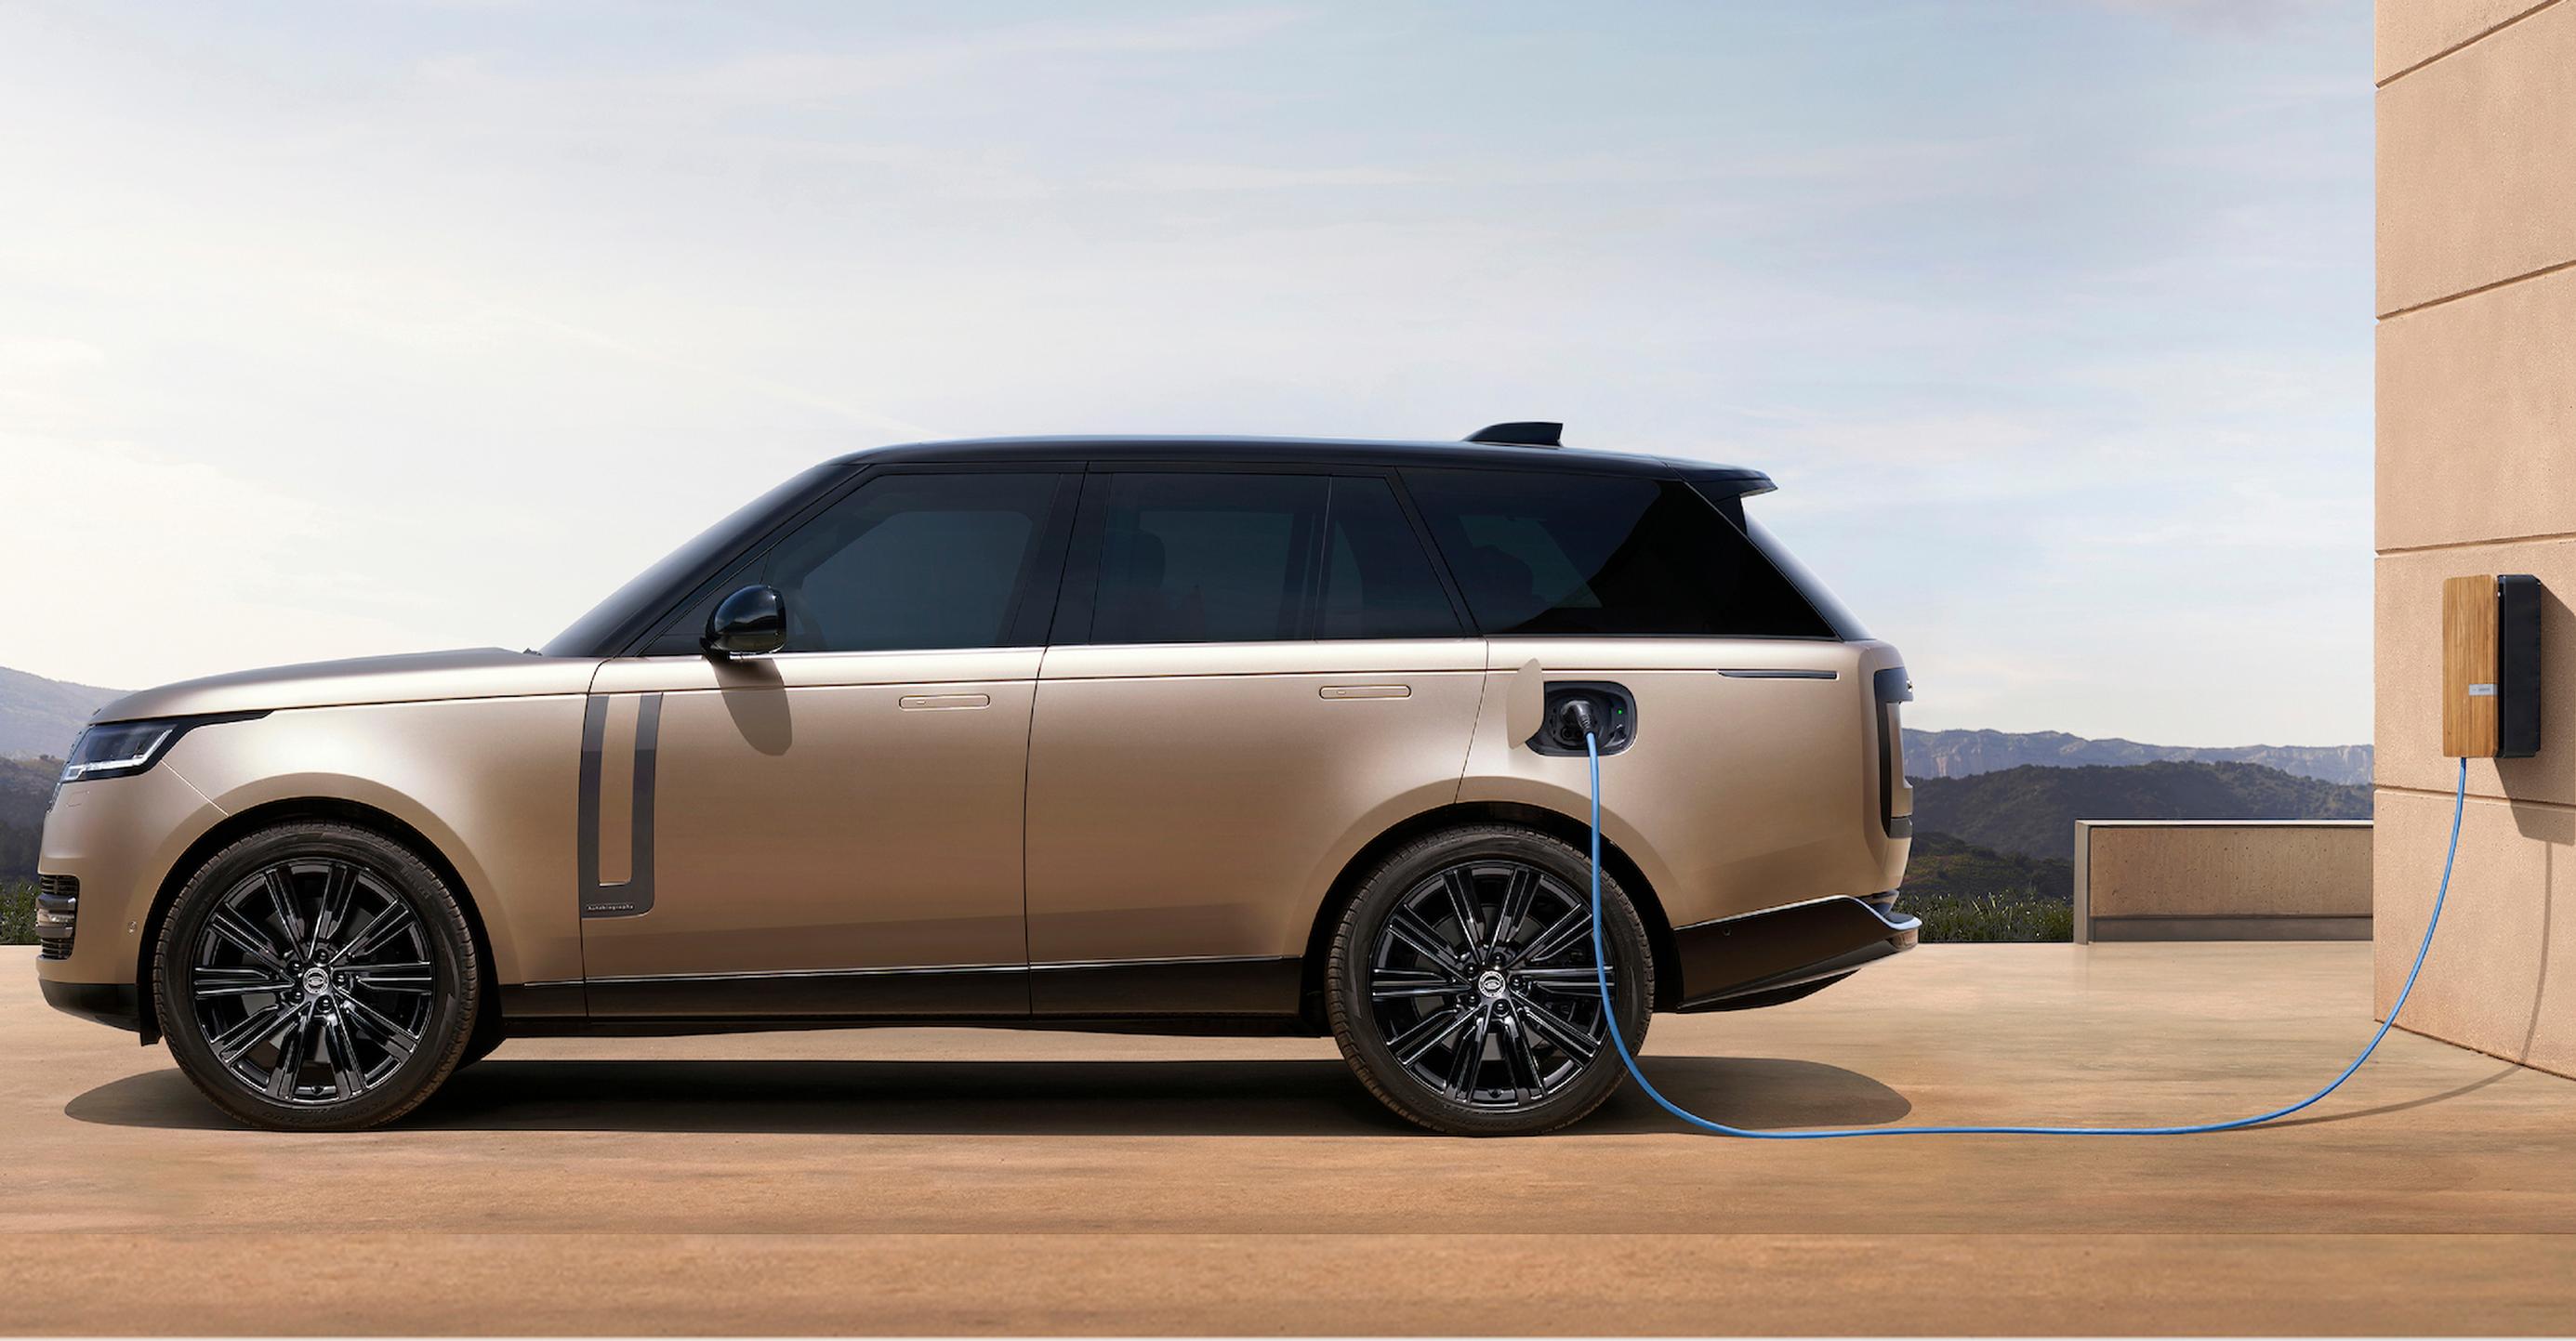 A Ranger Rover and Andersen EV charger